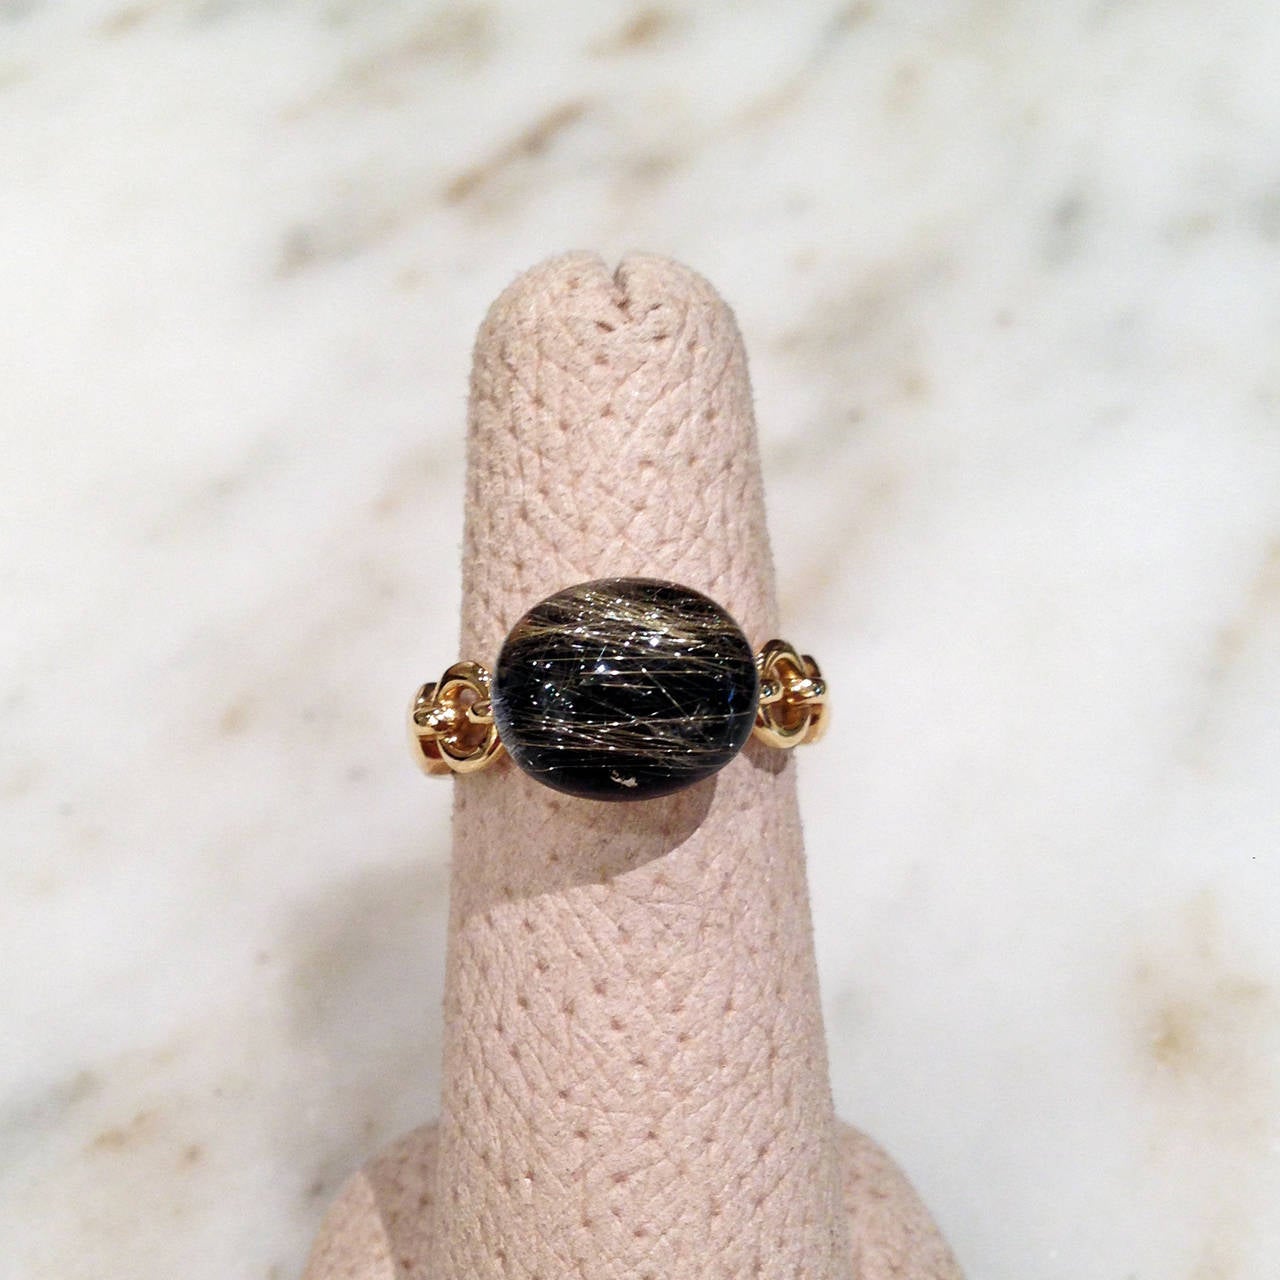 Handcrafted Three Dimensional Golden Needles Ring handcrafted in shiny 18k yellow gold with a cabochon-cut rutilated quartz laid over an onyx slice. Size 6.25 (Can be Sized).